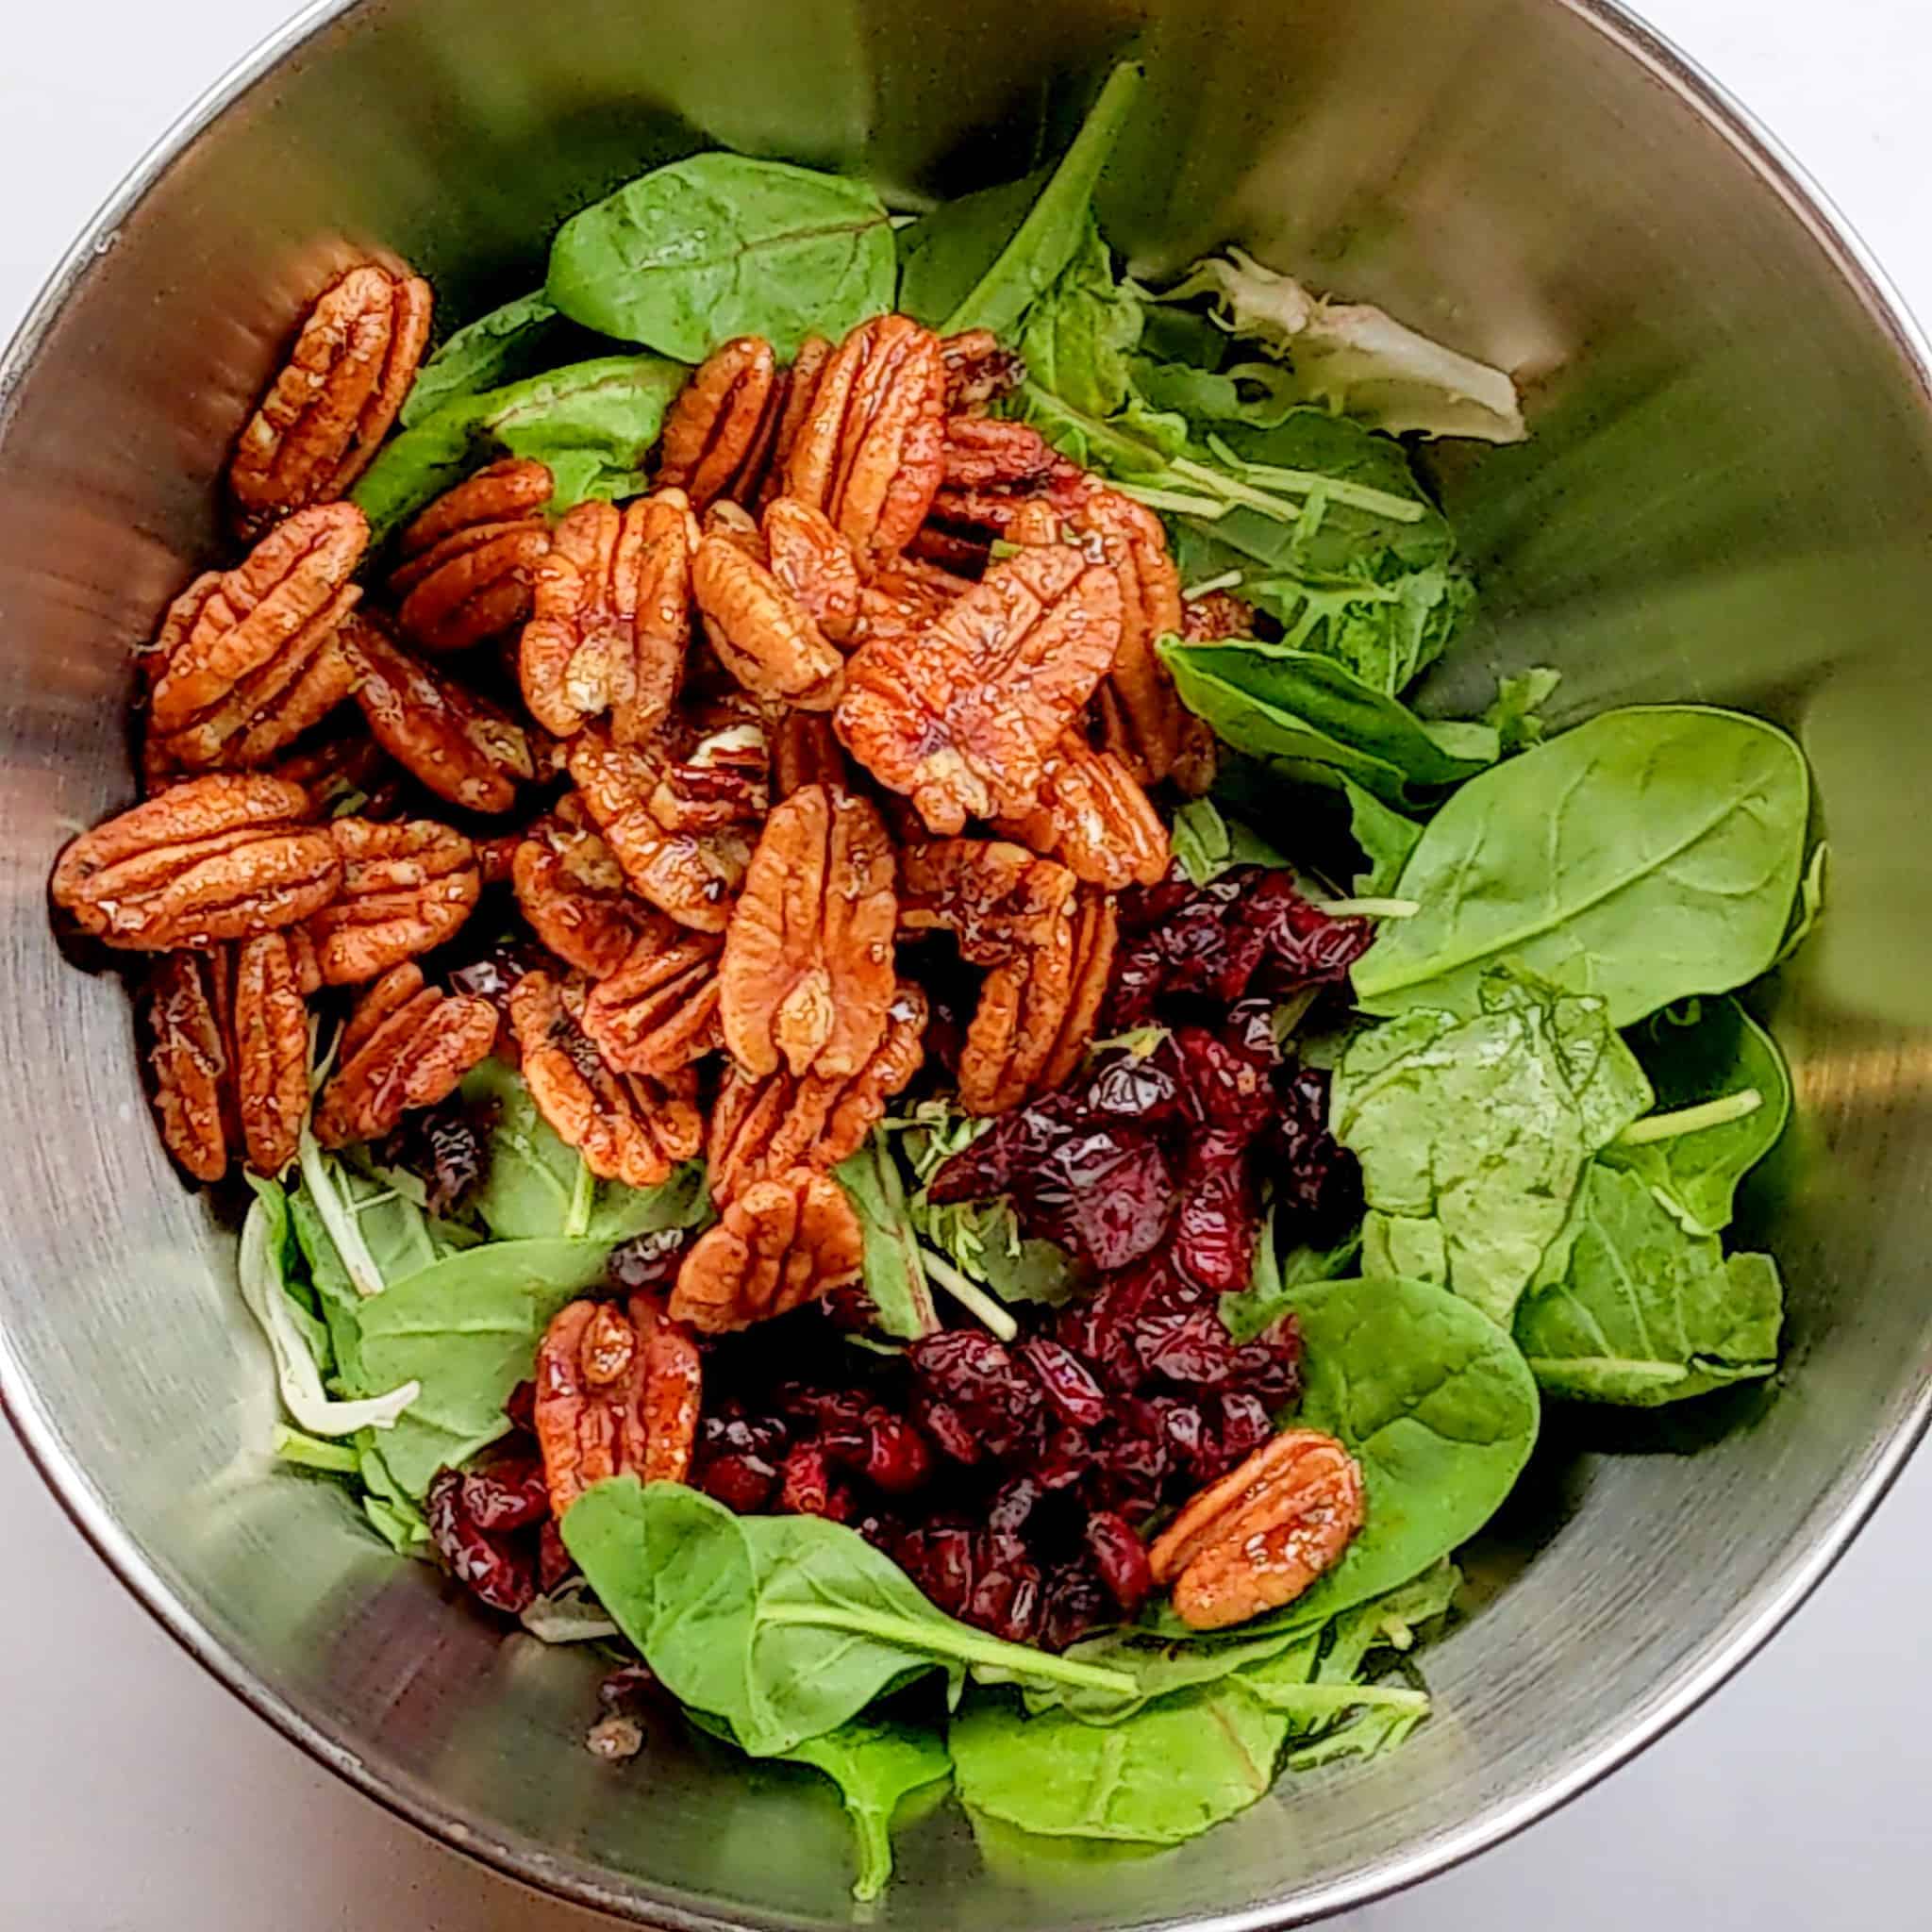 a stainless steel mixing bowl with mixed greens topped with candied pecans and dried cranberries.